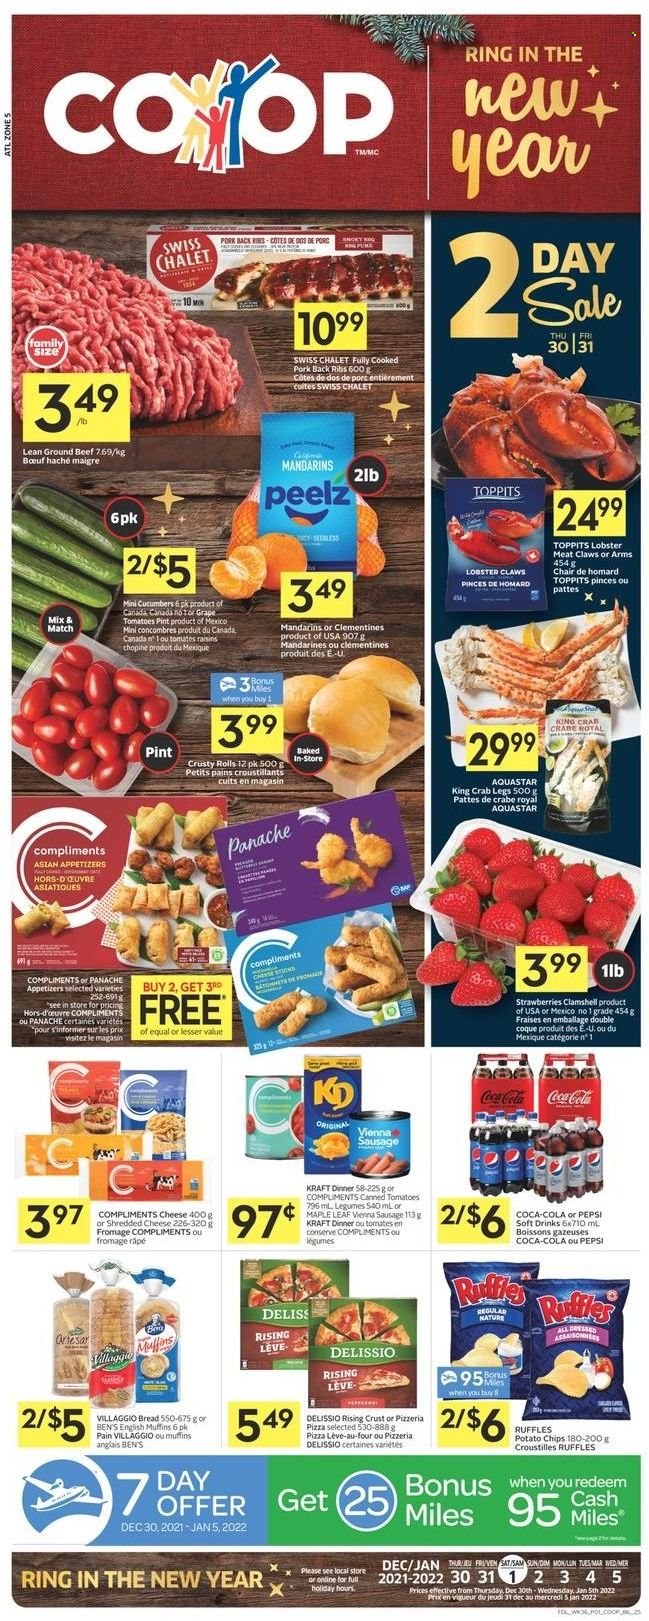 thumbnail - Co-op Flyer - December 30, 2021 - January 05, 2022 - Sales products - bread, english muffins, cucumber, clementines, mandarines, lobster, king crab, crab legs, crab, pizza, Kraft®, sausage, vienna sausage, shredded cheese, potato chips, Ruffles, dried fruit, Coca-Cola, Pepsi, soft drink, beef meat, ground beef, pork meat, pork ribs, pork back ribs, raisins, chips. Page 1.